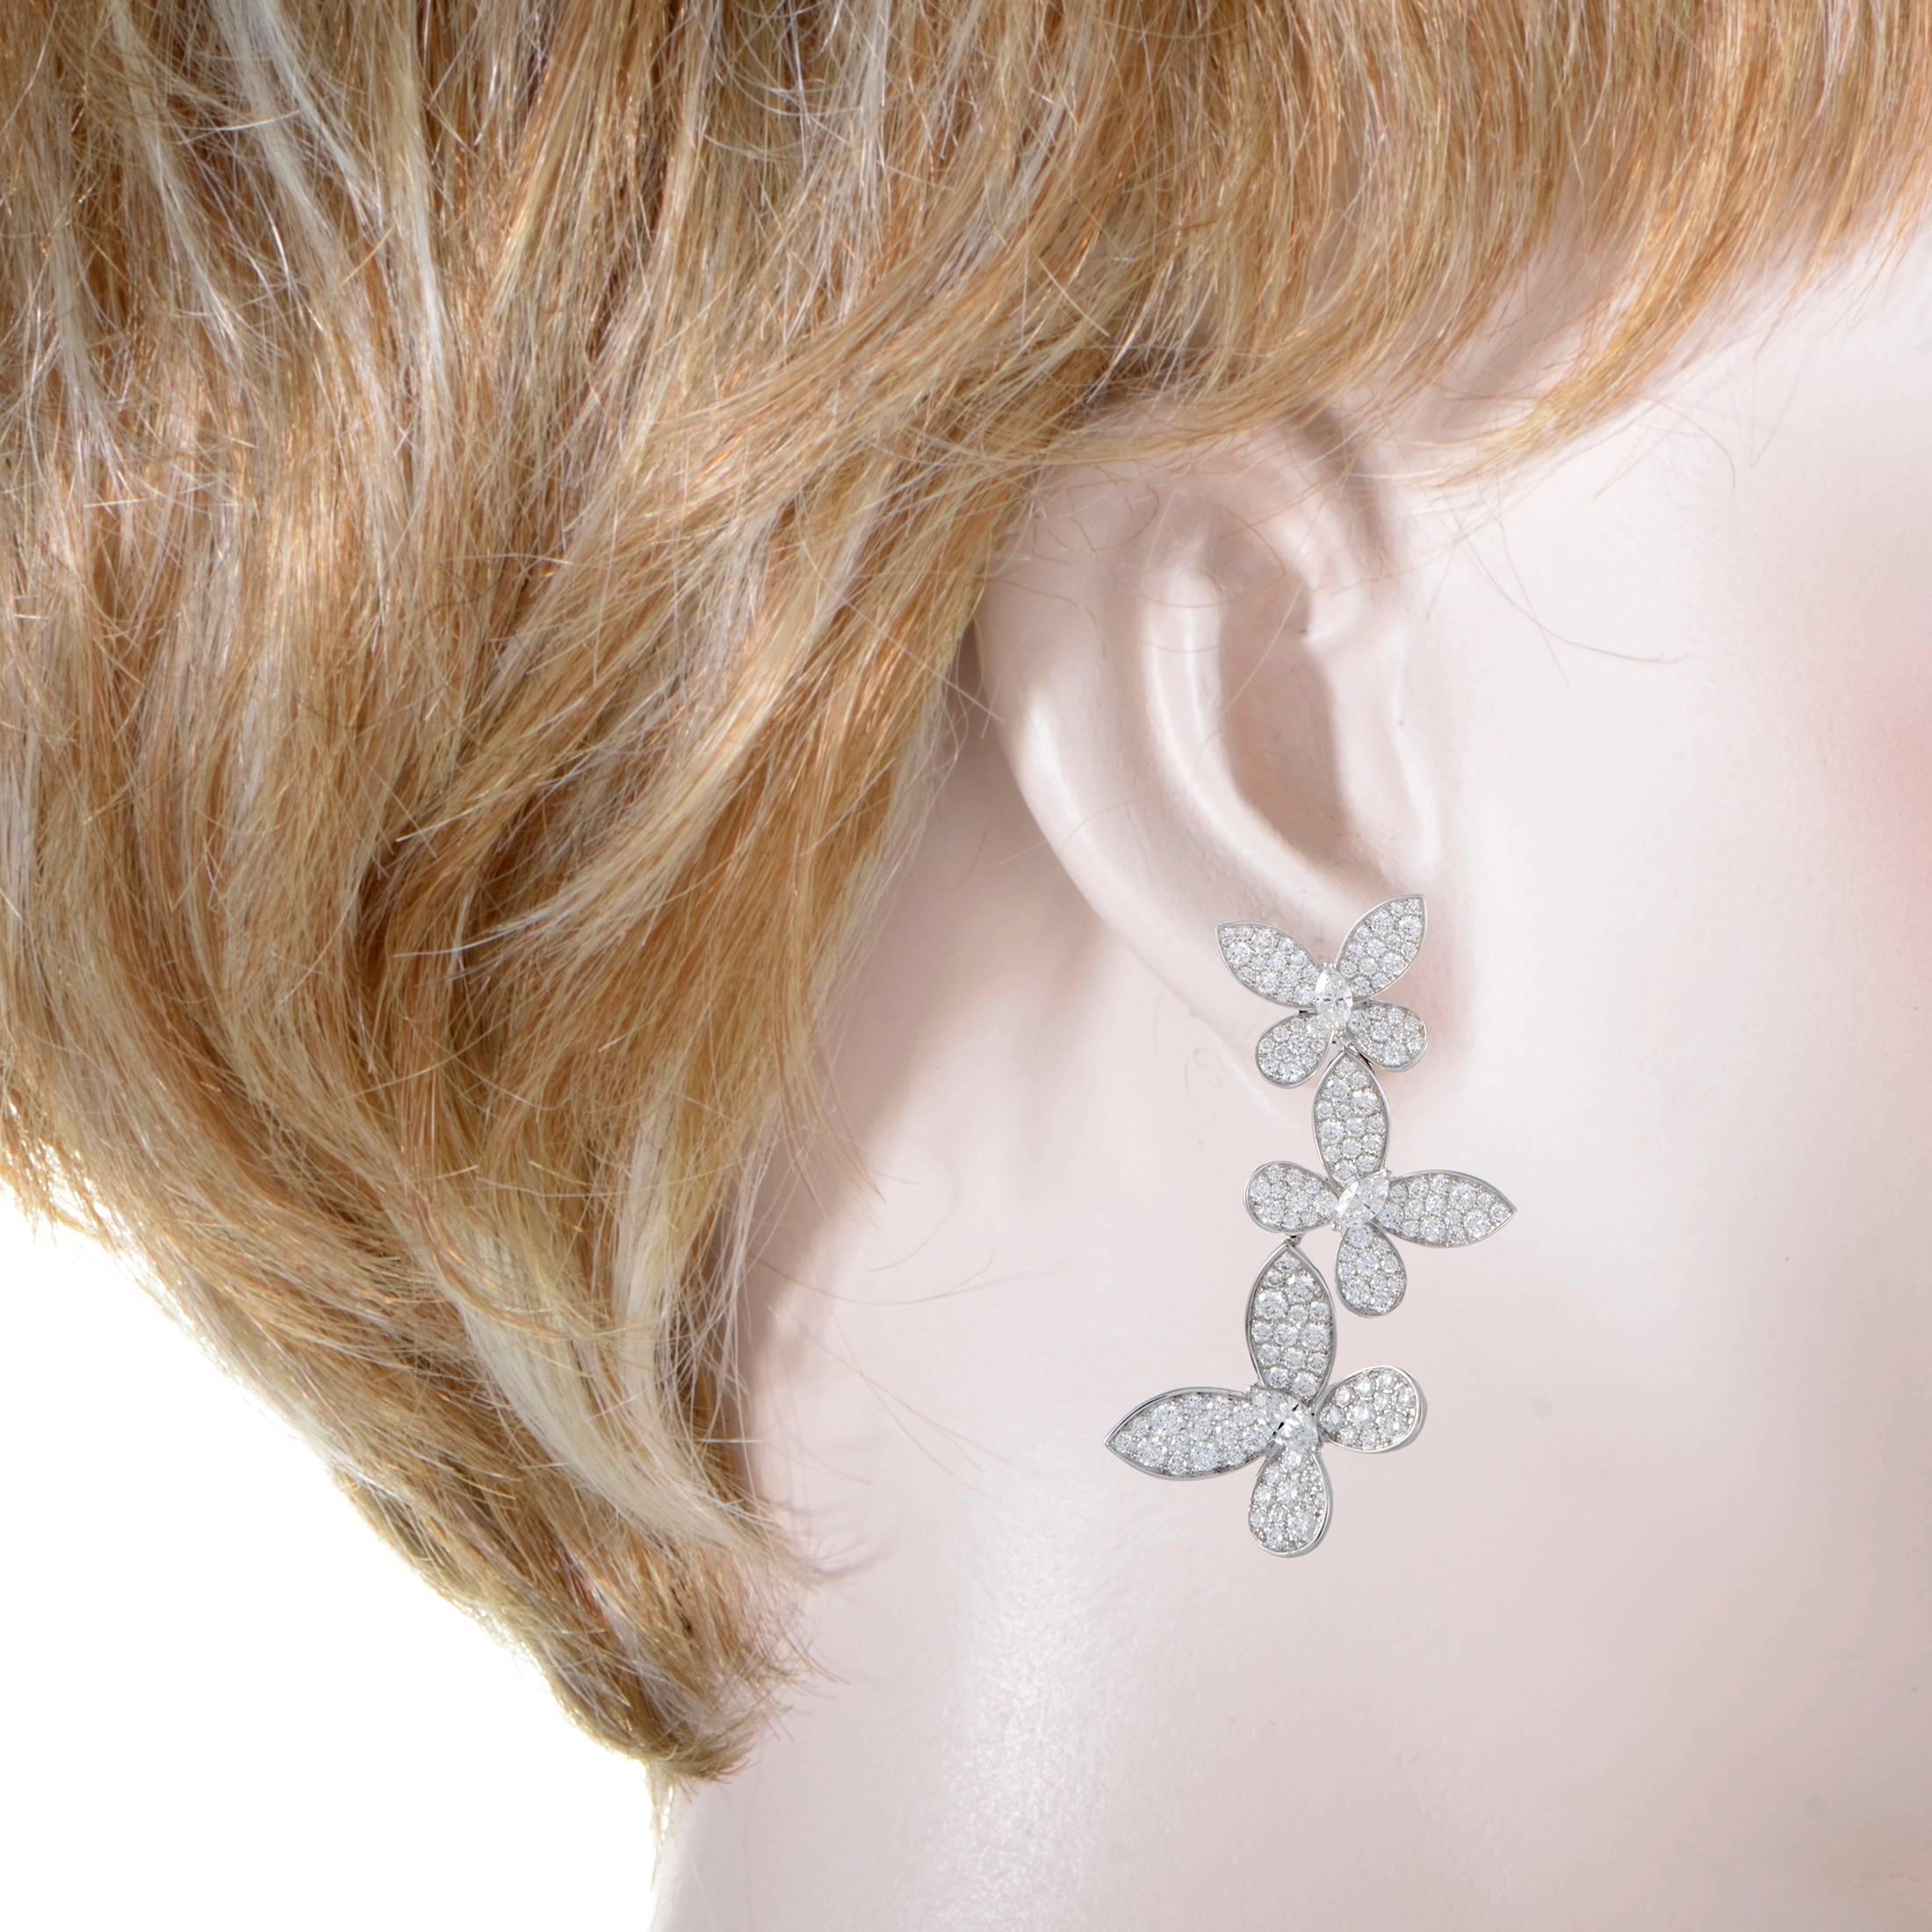 Boasting exceptionally lavish décor and offering sublime elegant appearance the brand is known for, these spectacular Graff earrings would make a perfect addition to your jewelry collection. The pair is made of prestigious 18K white gold with each